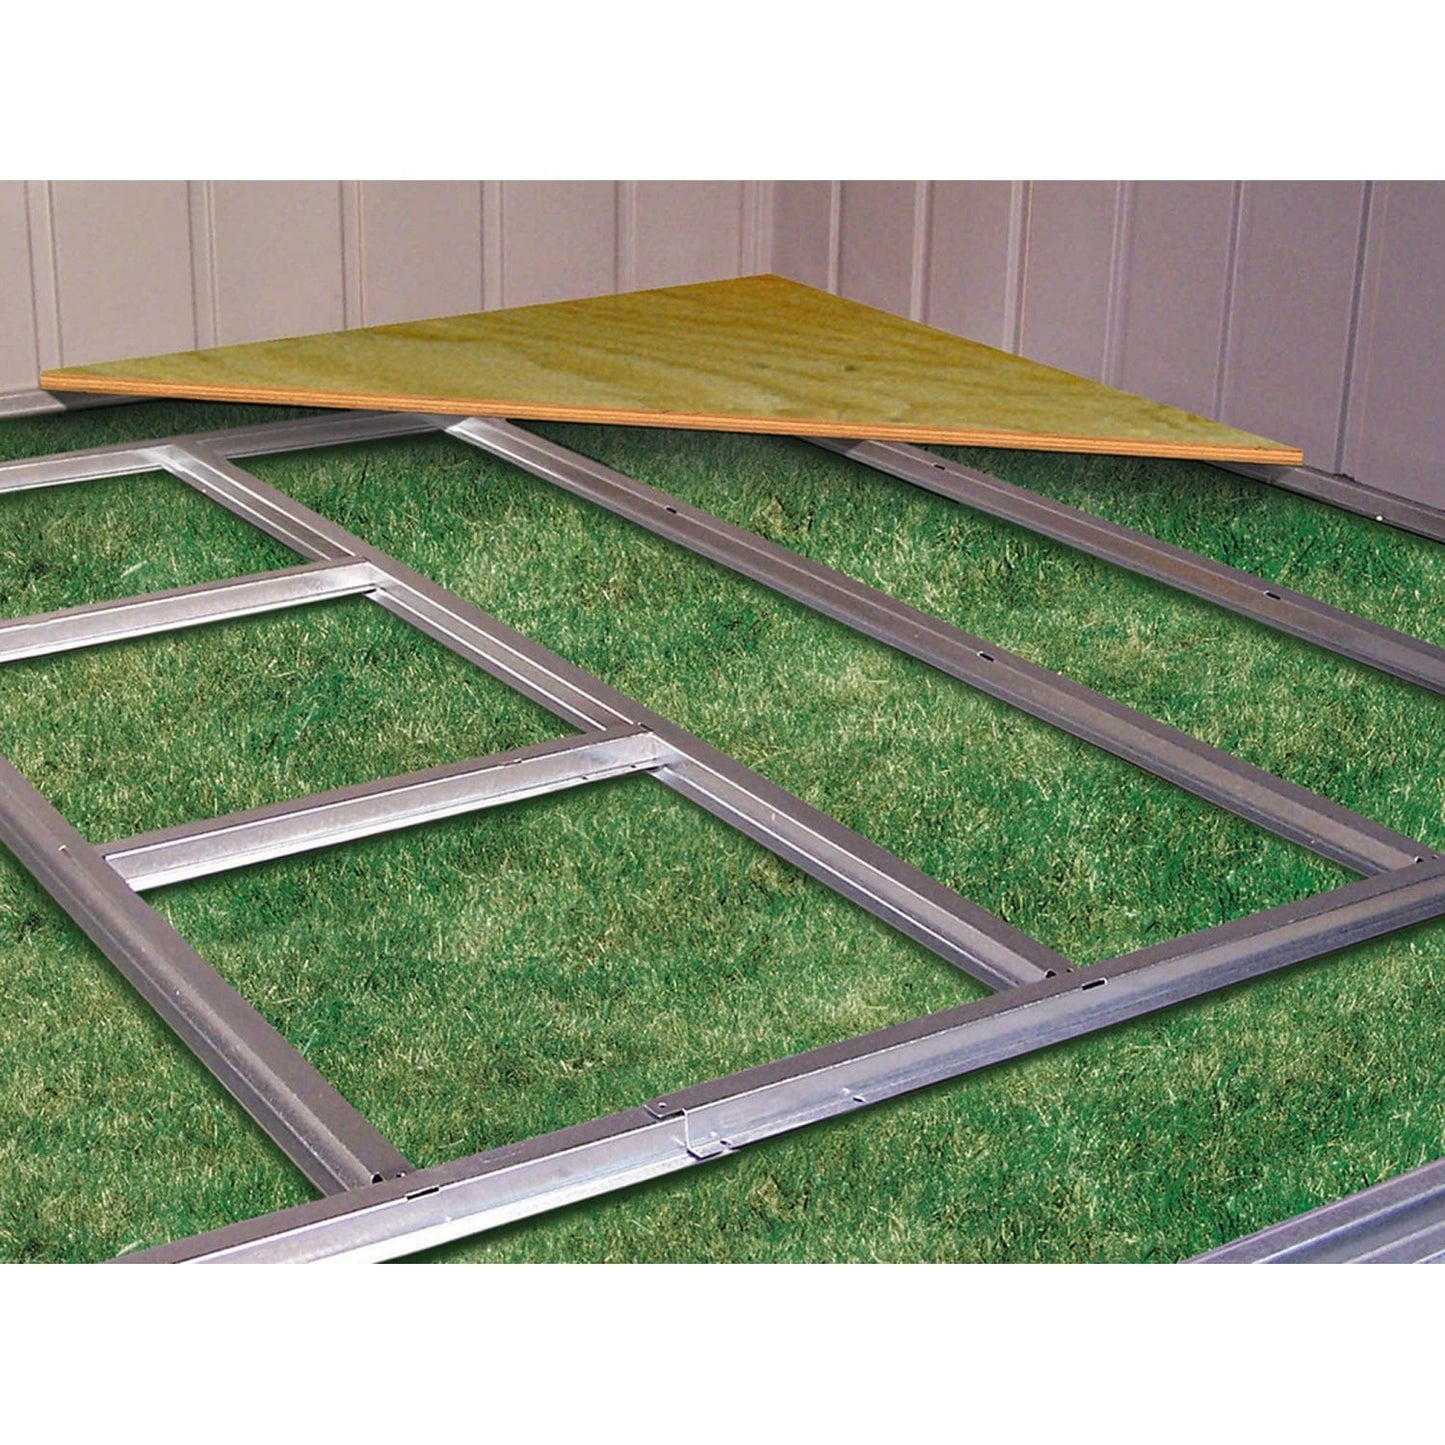 Arrow Shed Accessories Arrow | Floor Frame Kit for Arrow Classic Sheds 10x4, 10x6, 10x7, 10x8, 10x9 and 10x10 ft. and Arrow Select Sheds 10x4, 10x6, 10x7, and 10x8 ft. FKCS03